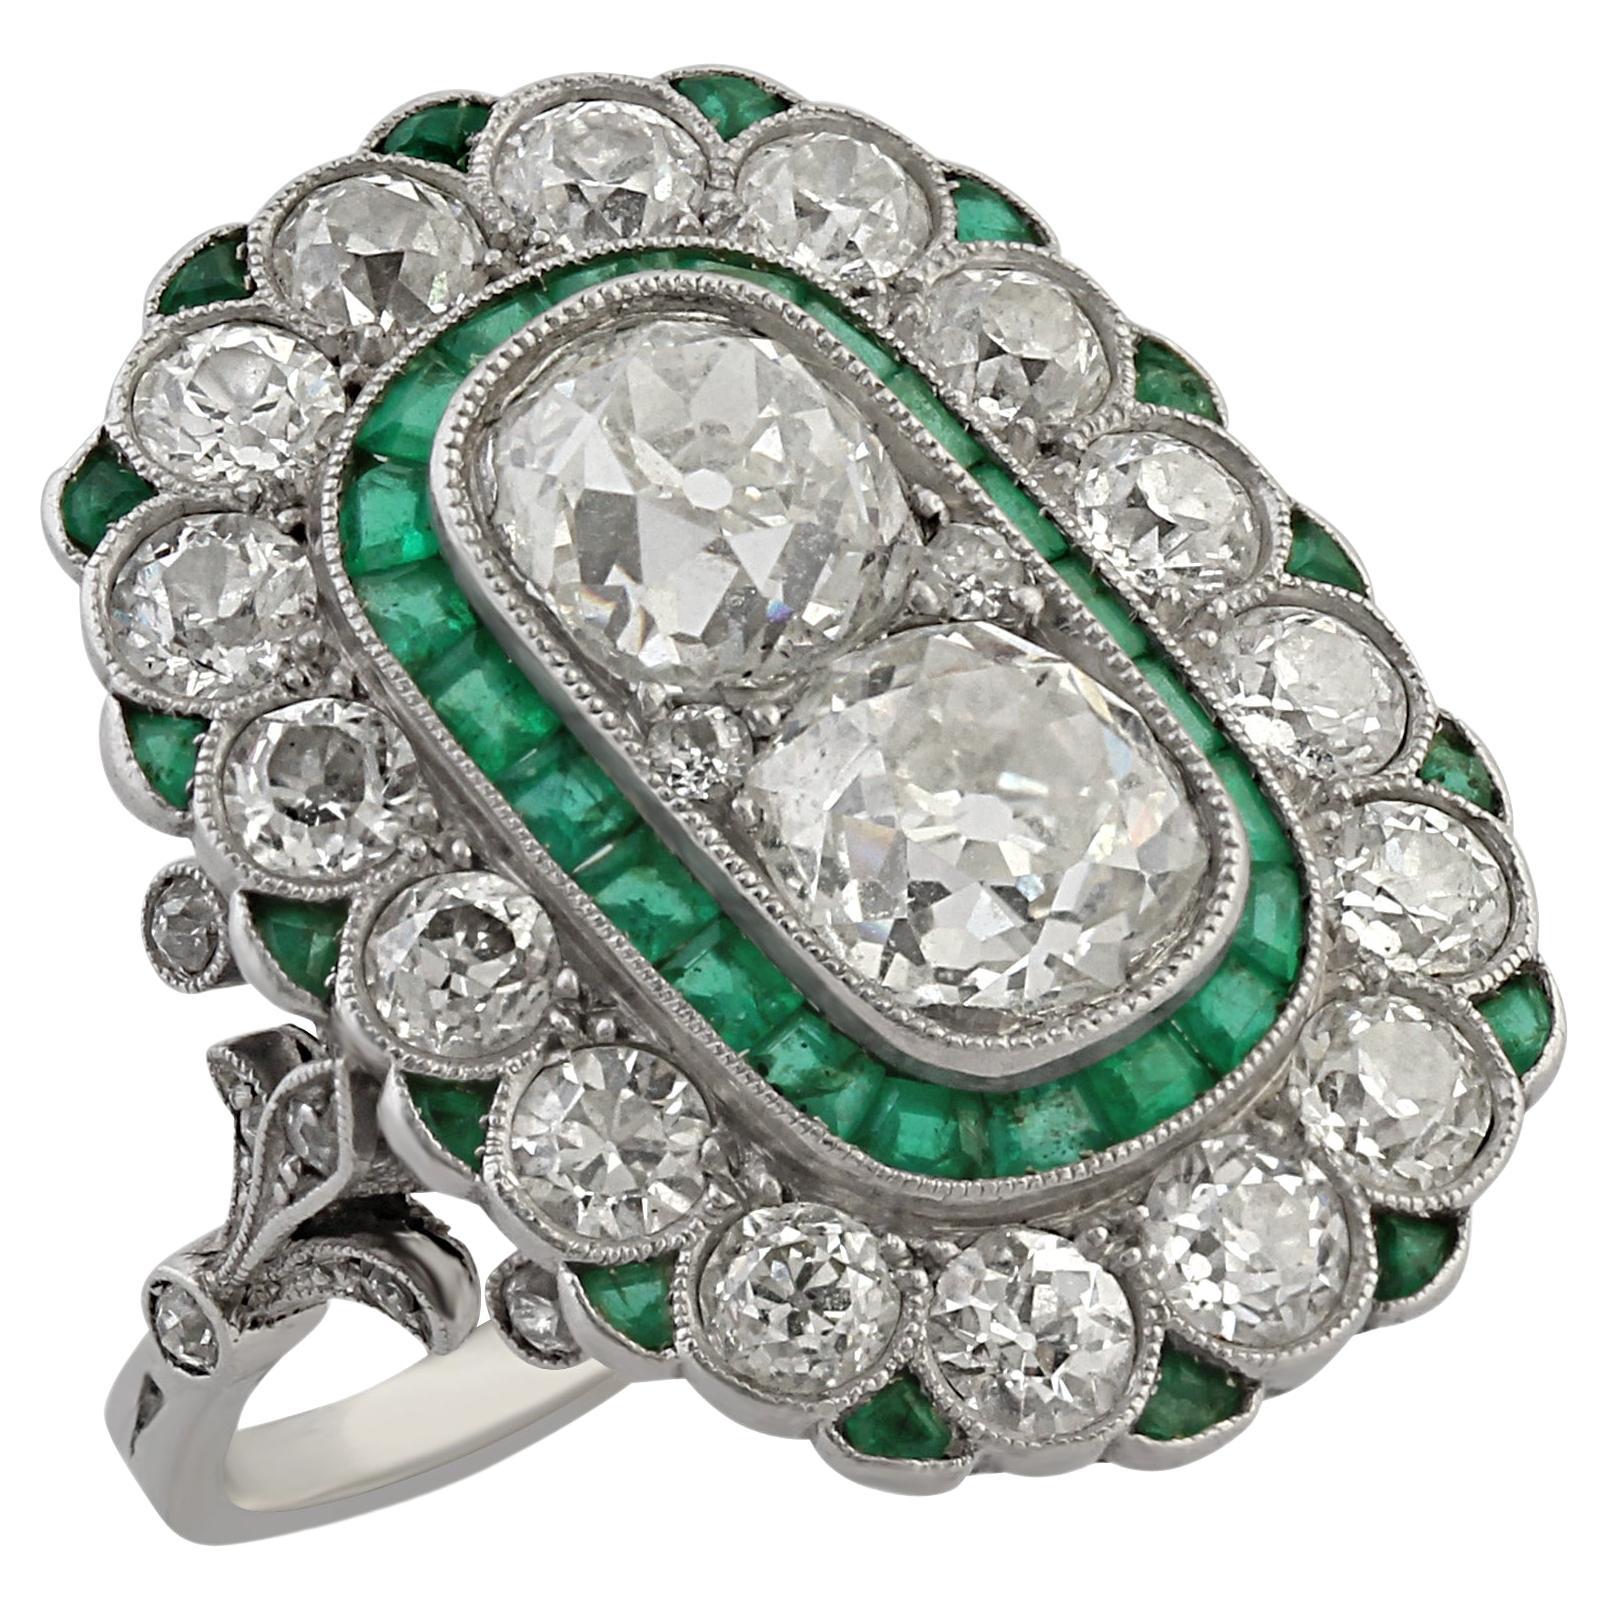 An Antique Old-Cut Diamond & Emerald Ring For Sale